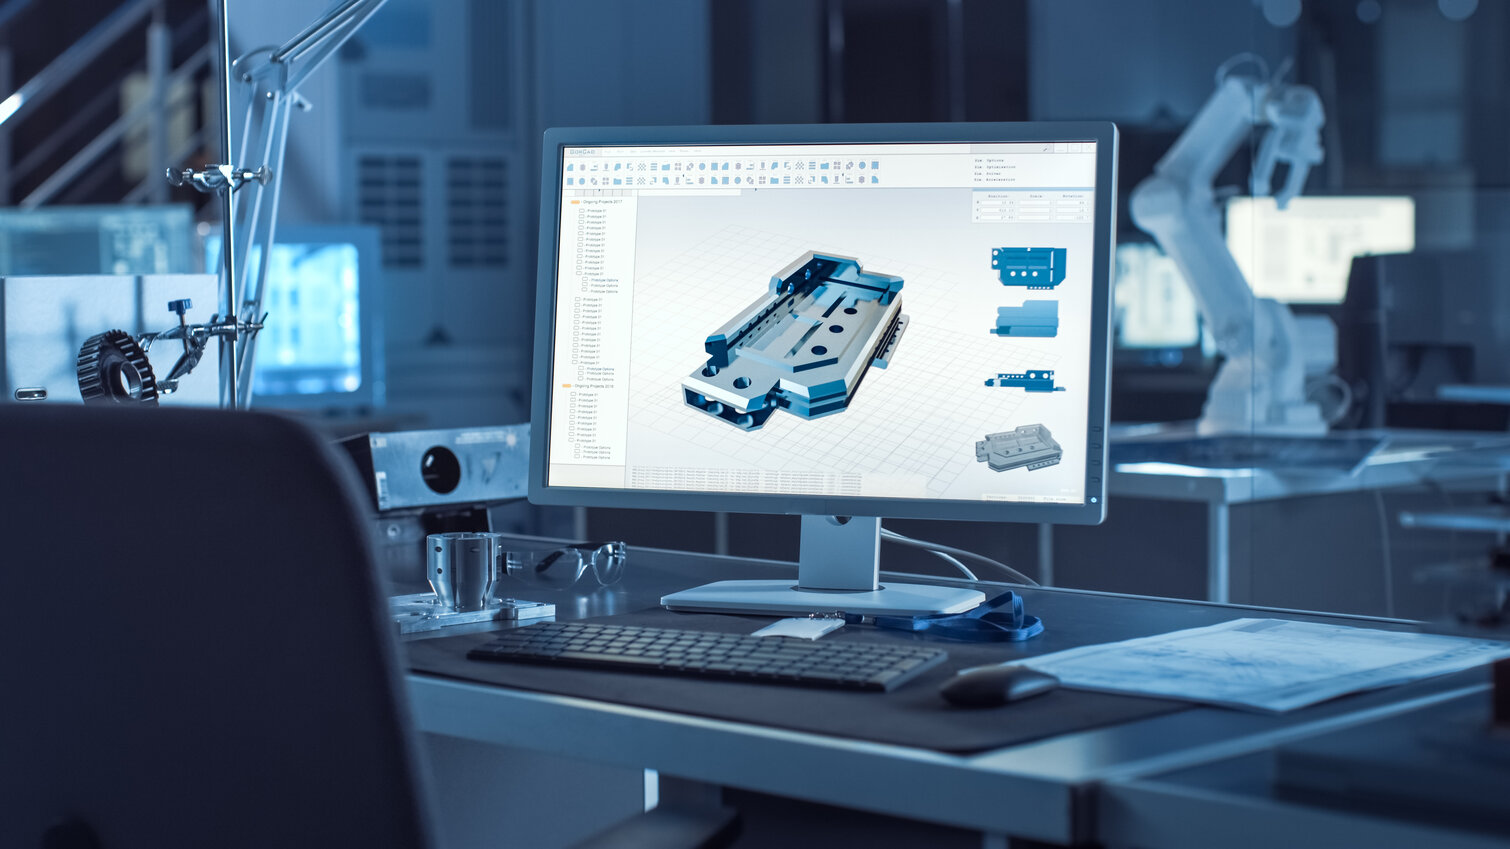  Optimized component made of technical ceramics during the optimization process in the CAD software